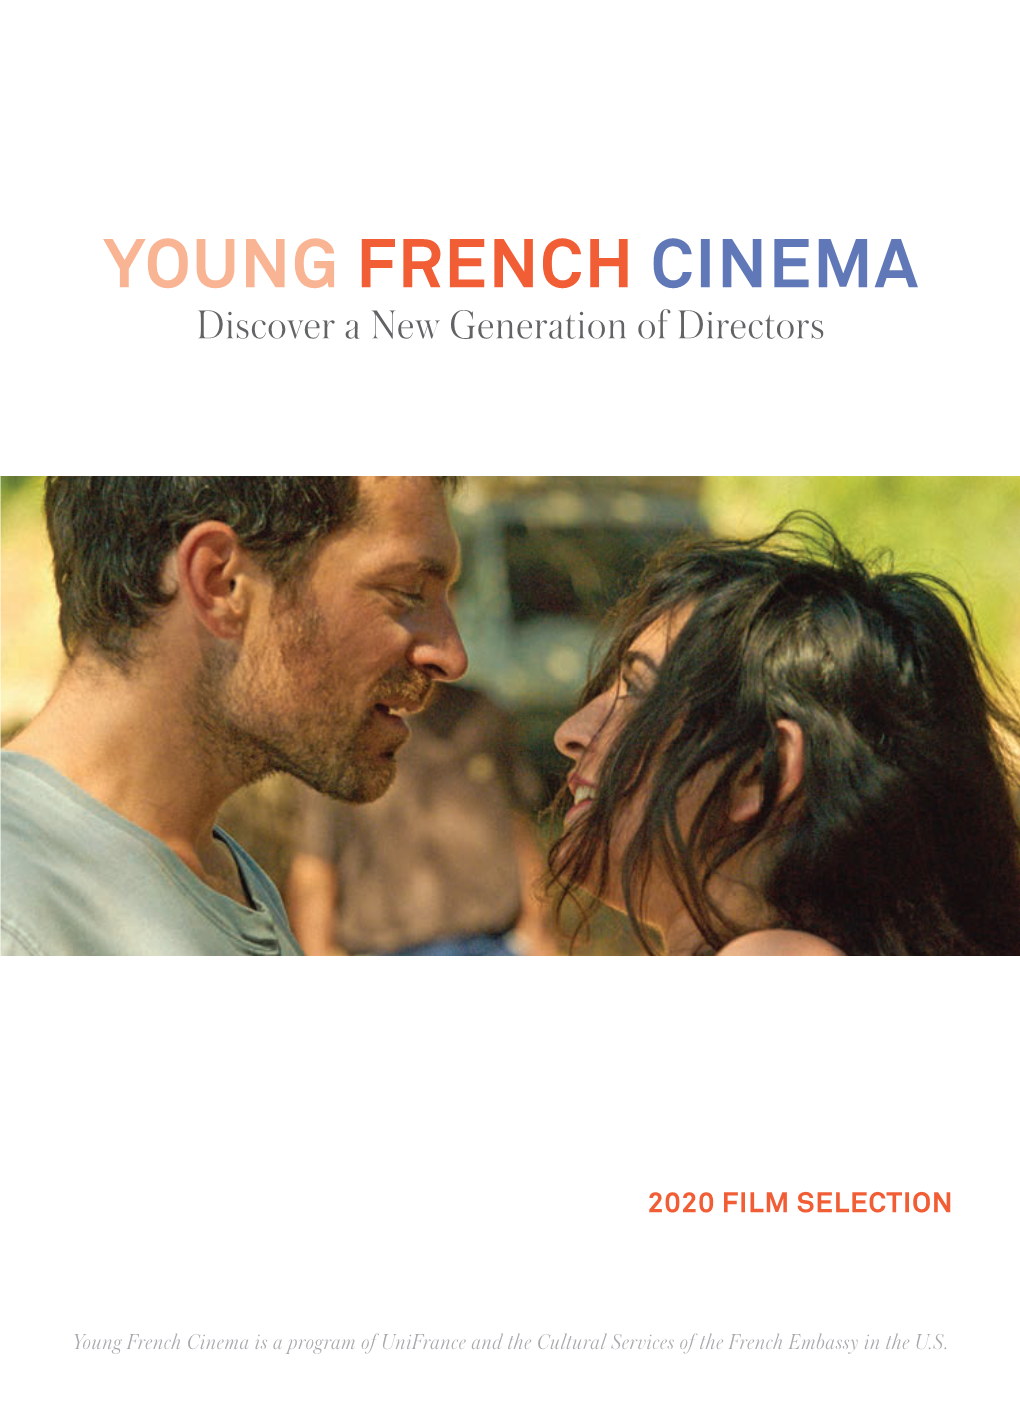 YOUNG FRENCH CINEMA Discover a New Generation of Directors